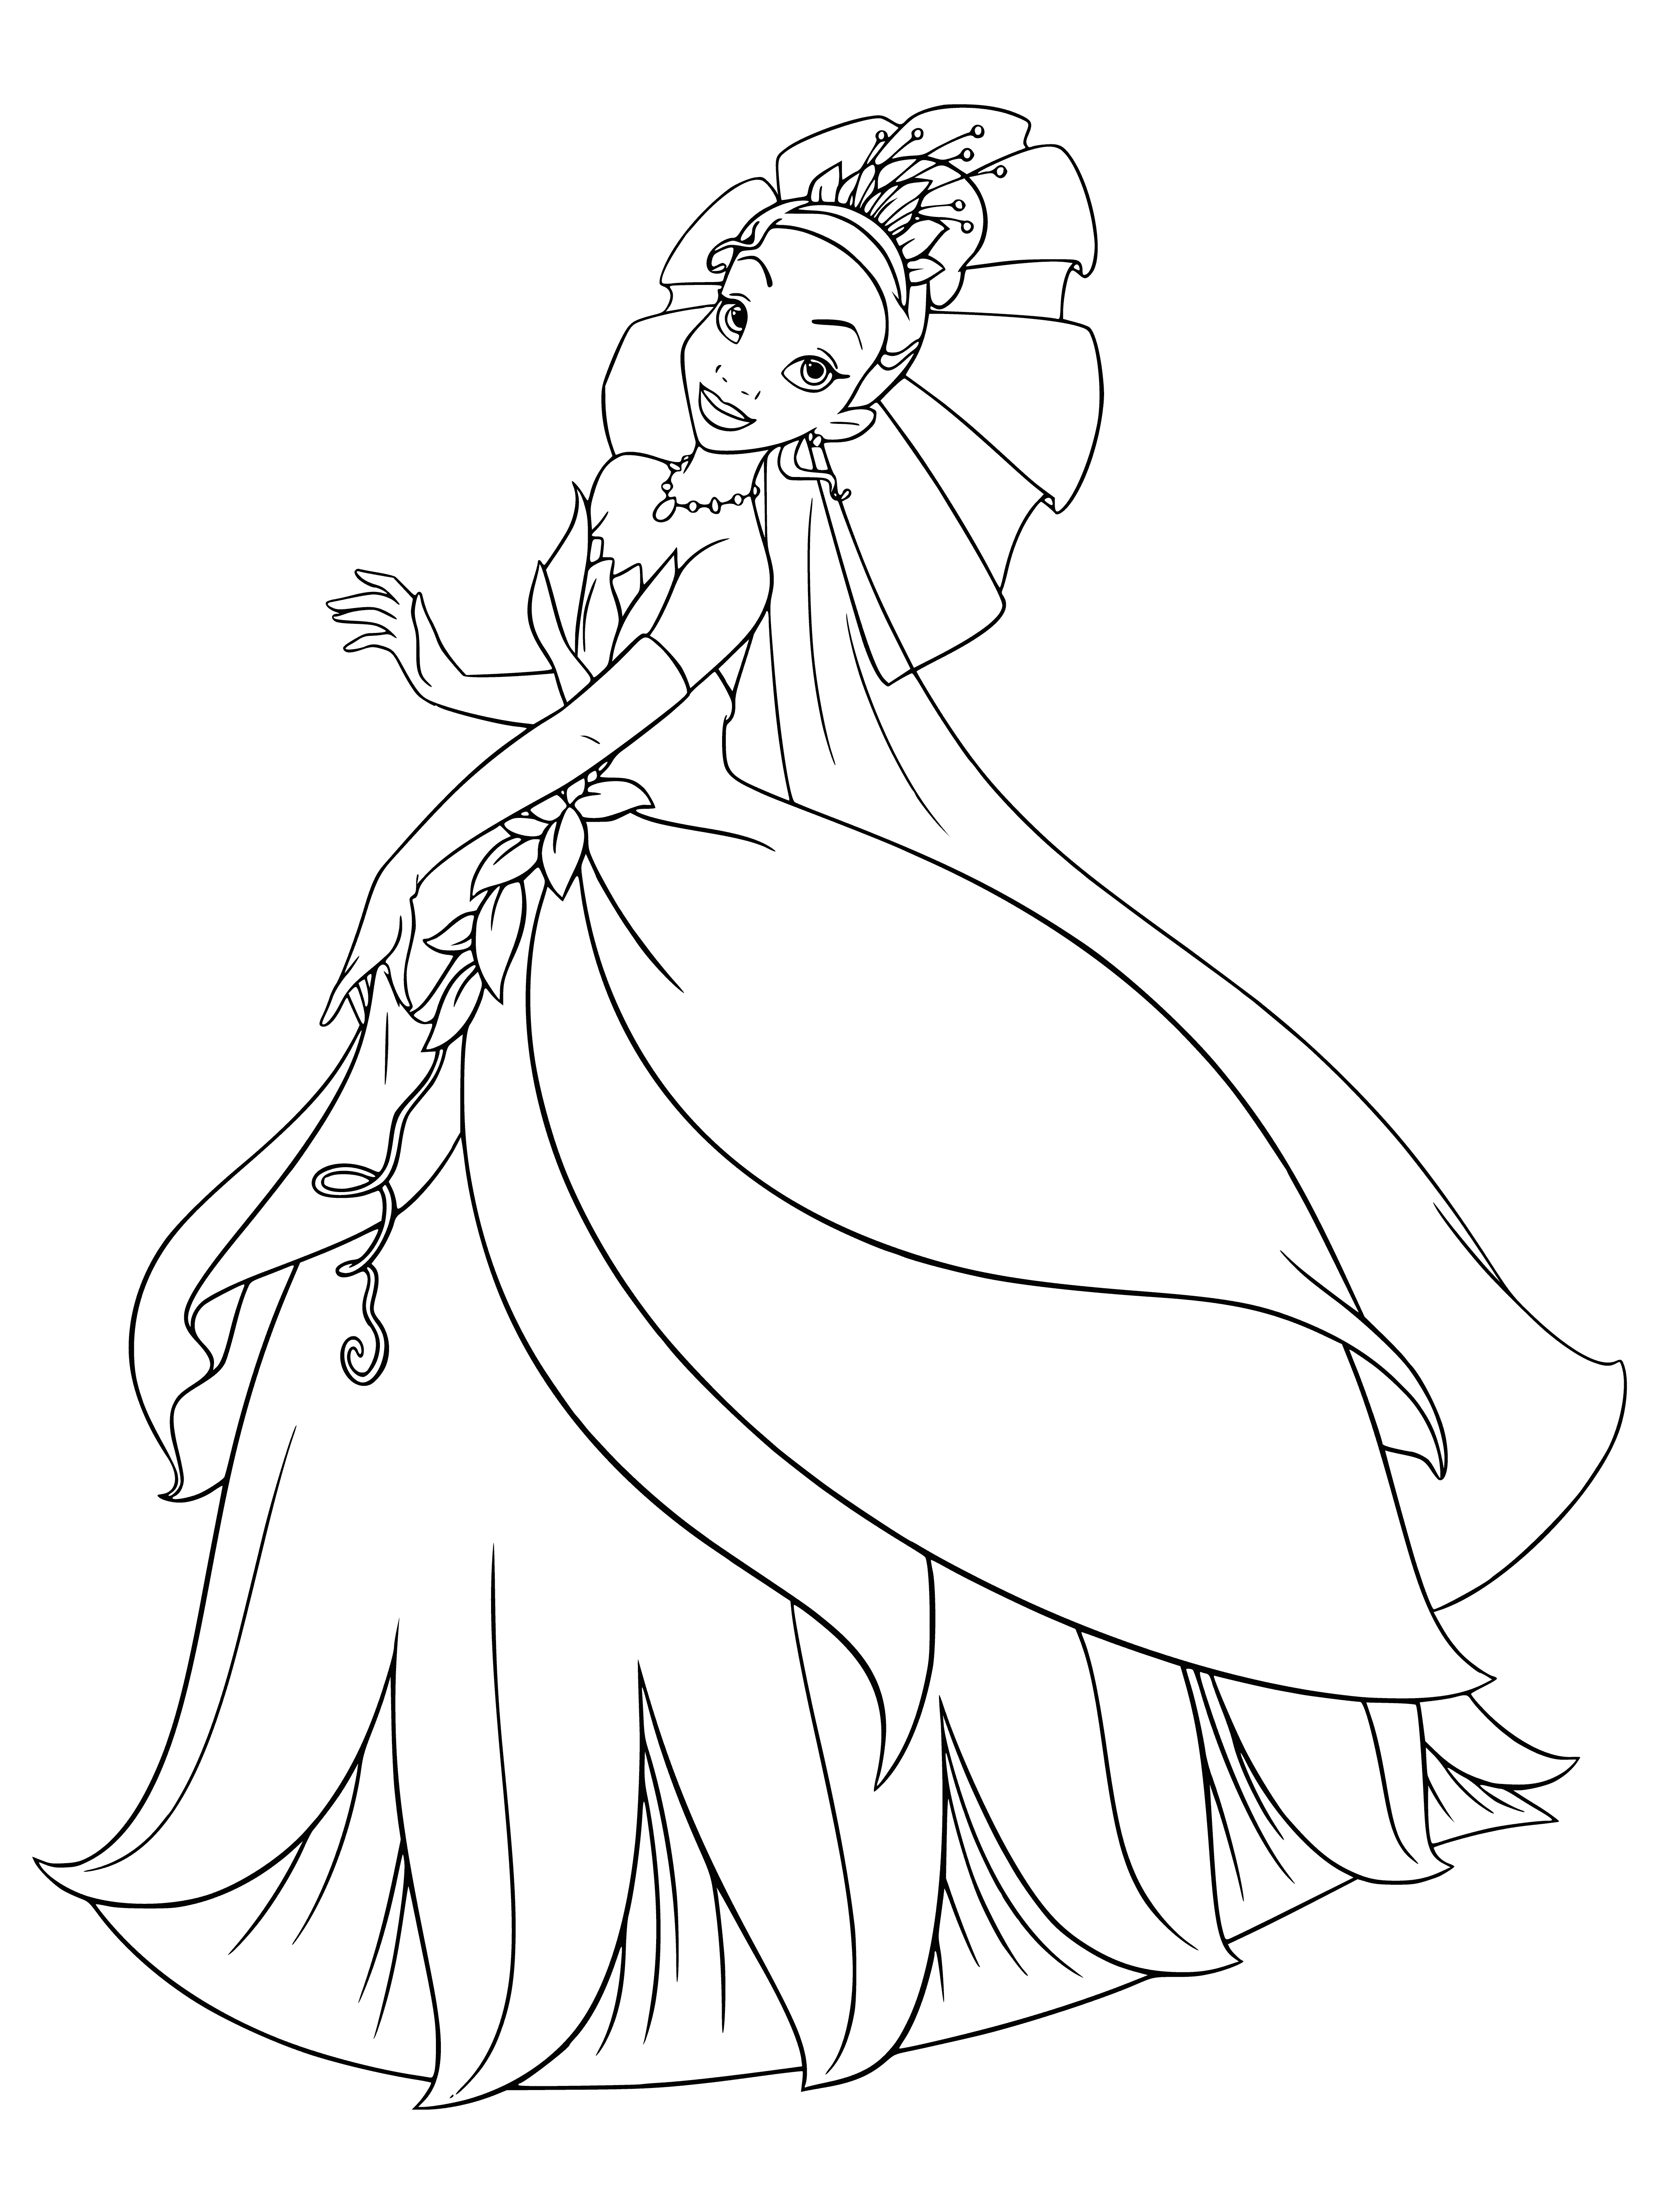 coloring page: Princess Tiana stands with a frog looking up at her, wearing a green dress with purple flowers, smiling.